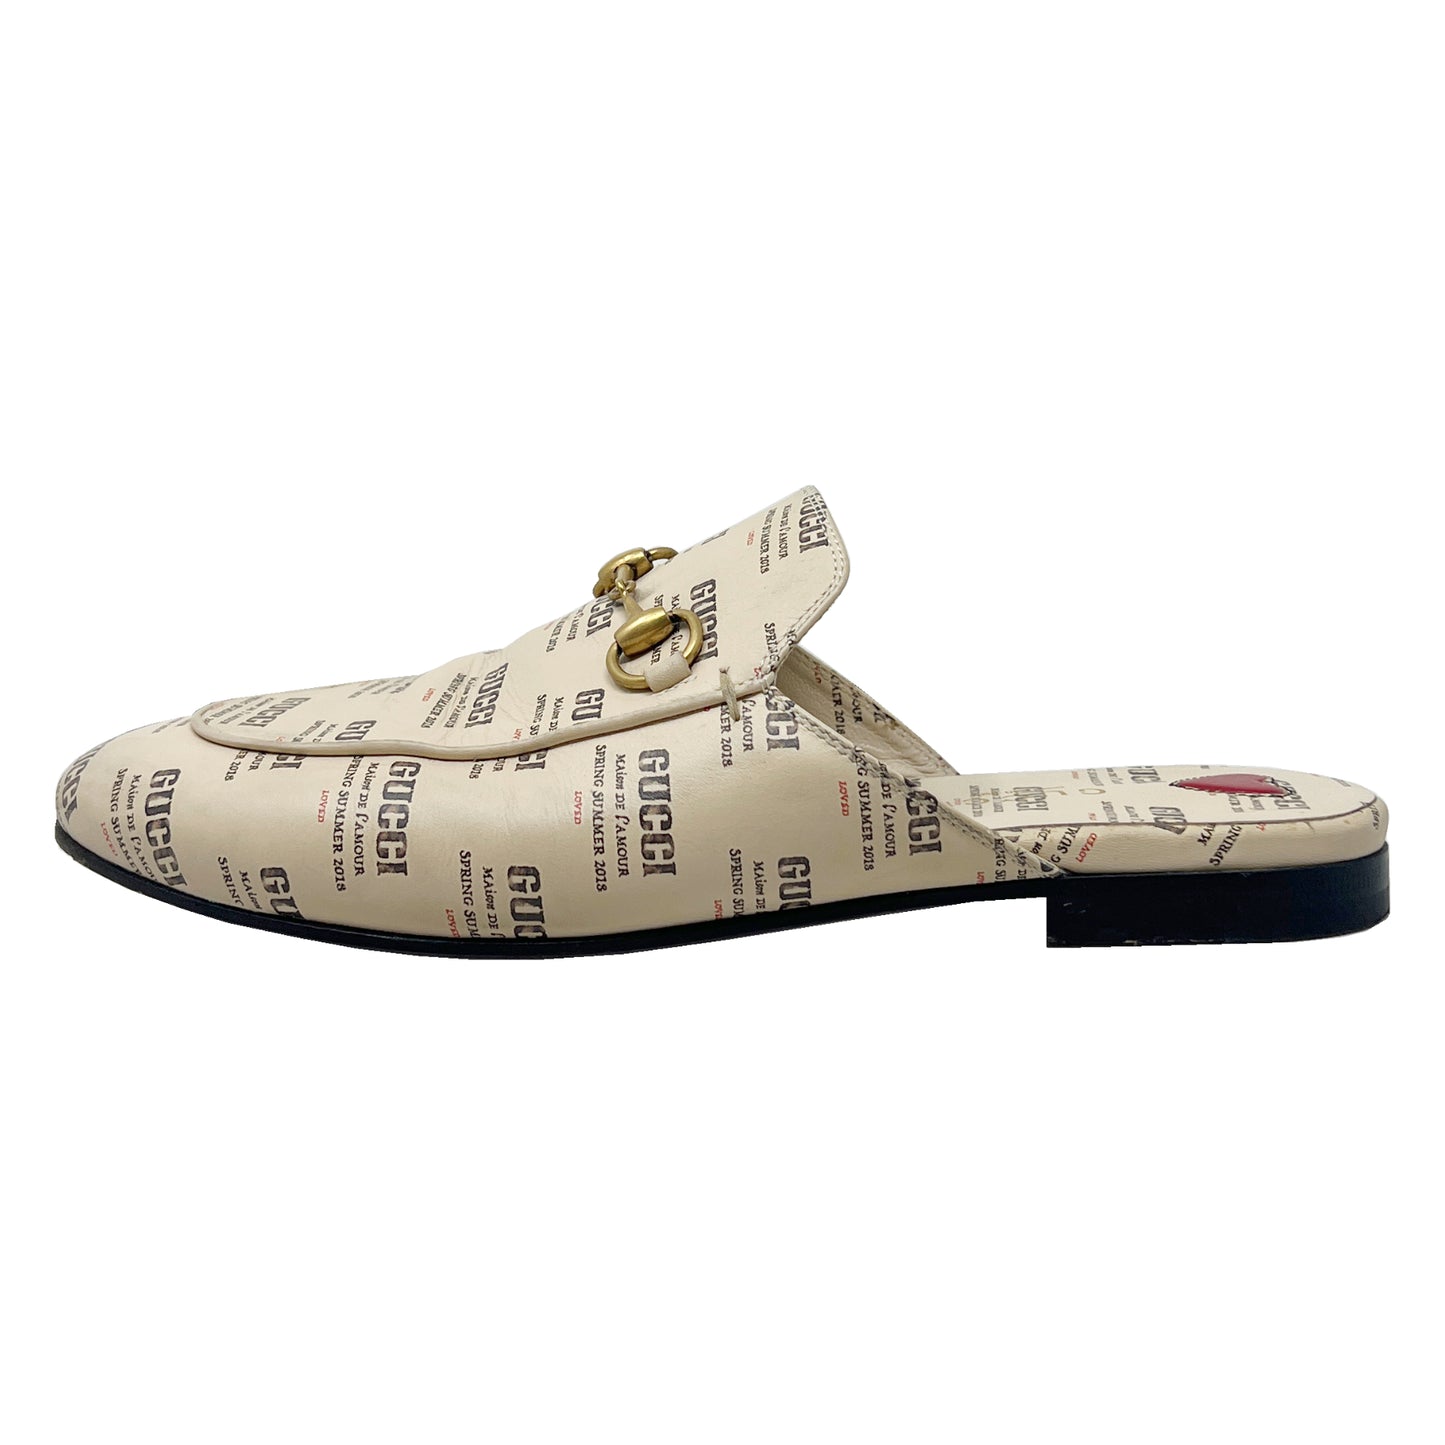 Gucci Shoes Princetown Beige Leather Stamped Logo Limited Edition Loafer Flats